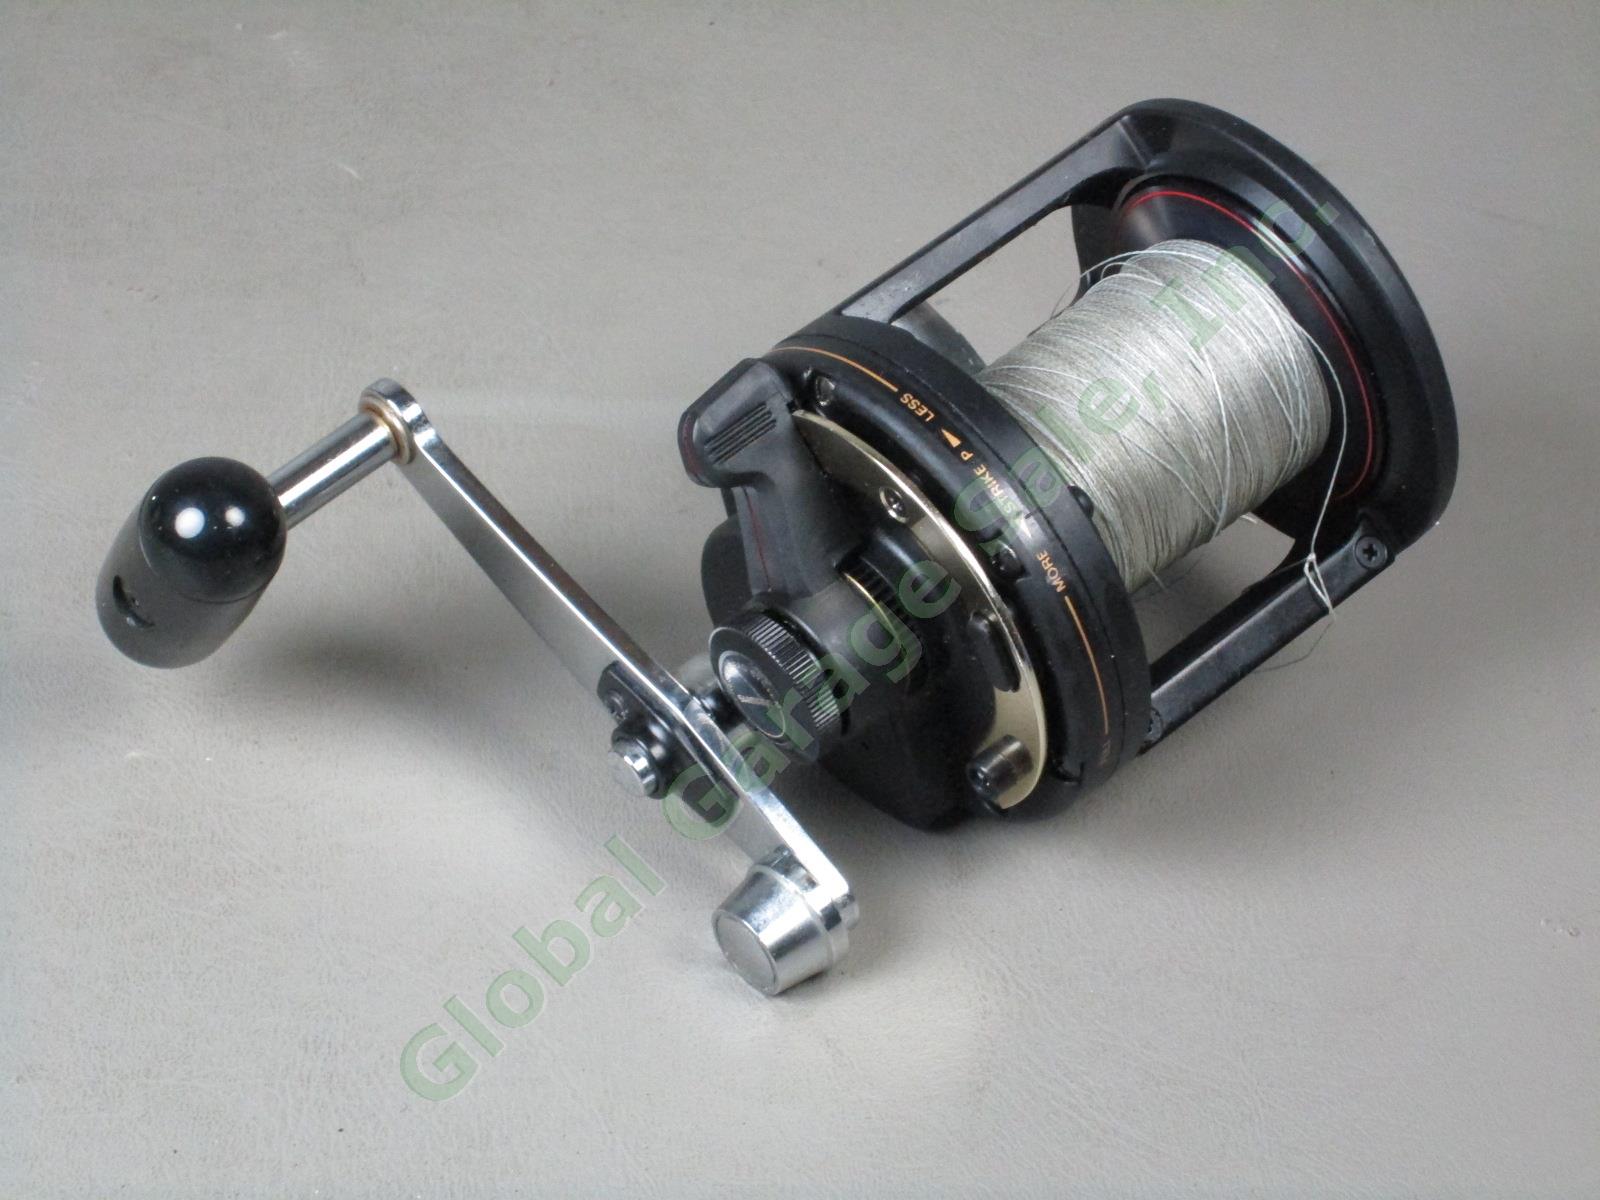 Shimano TLD15 Lever Drag Saltwater Fishing Reel One Piece Graphite Exc+ Cond NR! 2